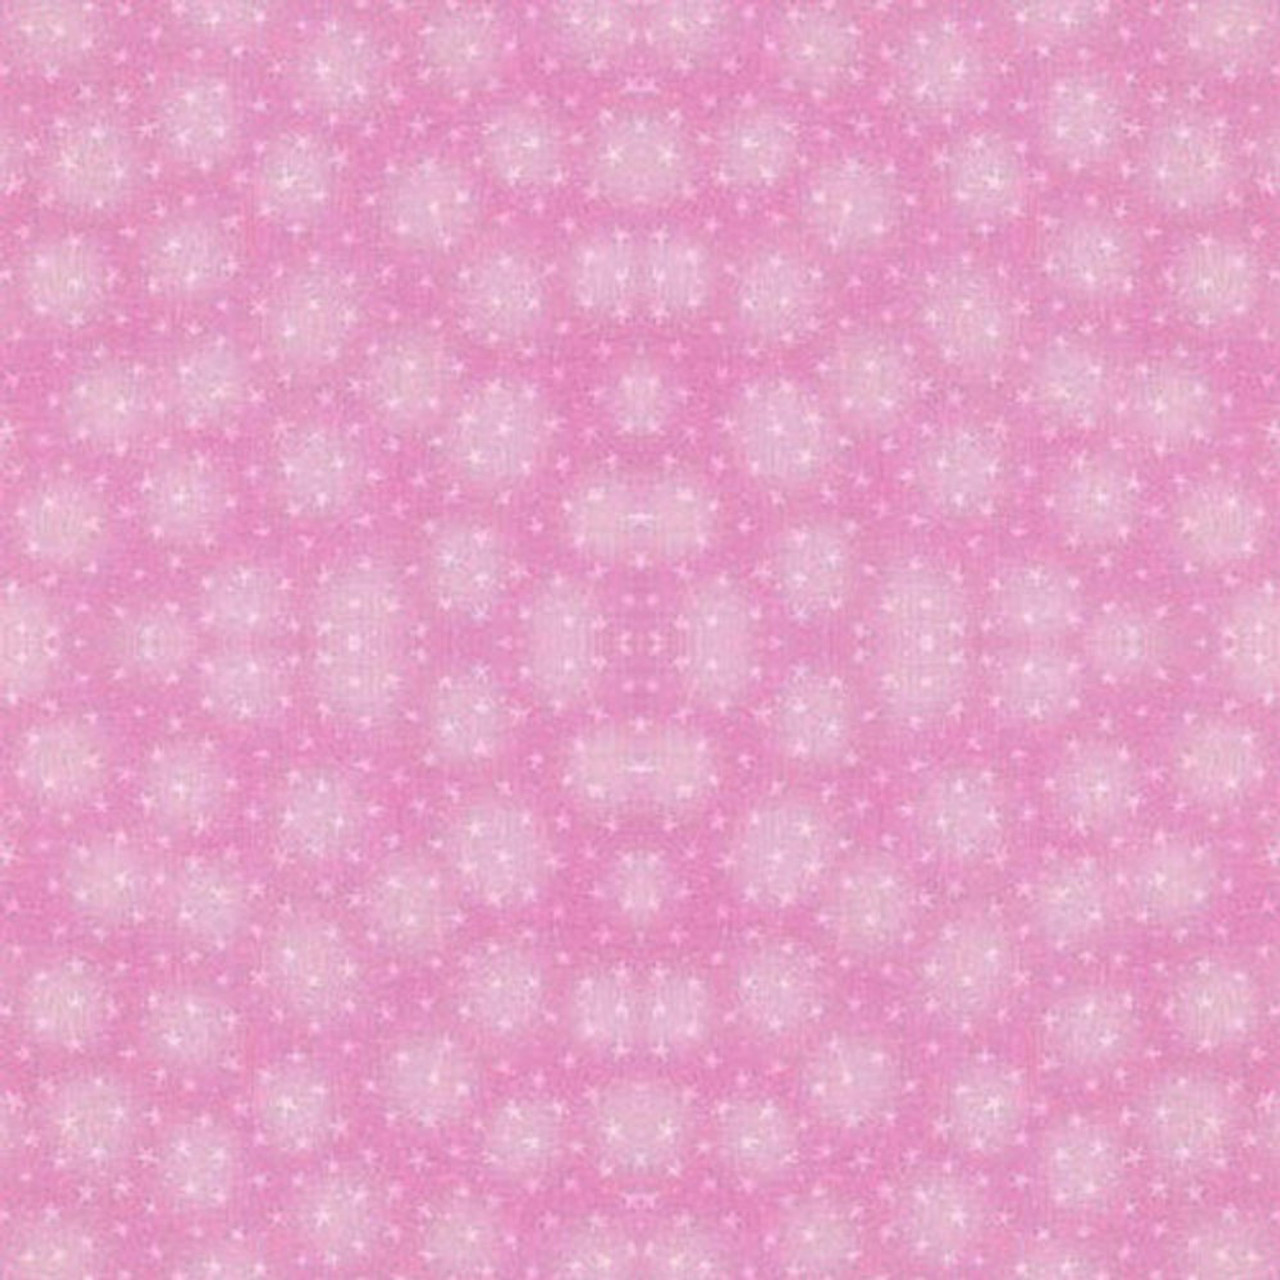 Blank Quilting Starlet 6383 Small Stars Petal Cotton Fabric By The Yard